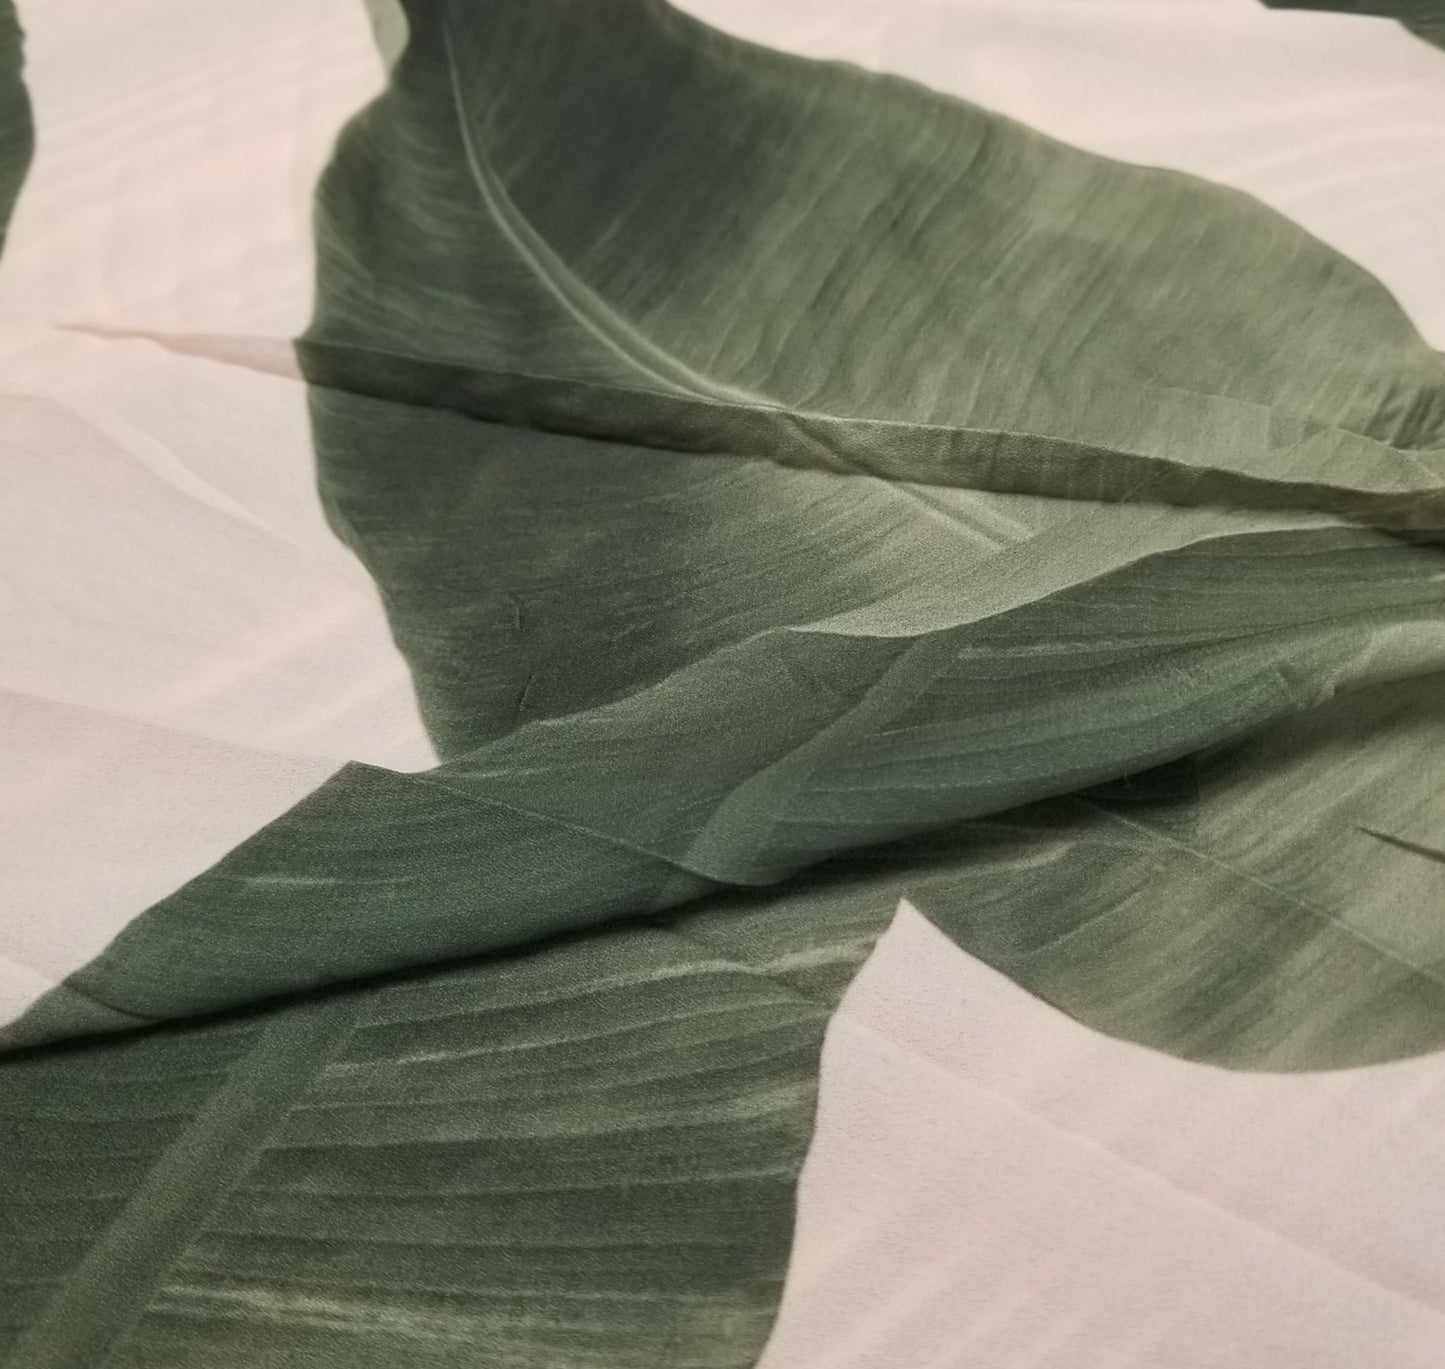 Designer Deadstock Baby Pink and Large Scale Green Foliage Leaves Crepe De Chine Blousewear Woven- Sold by the yard